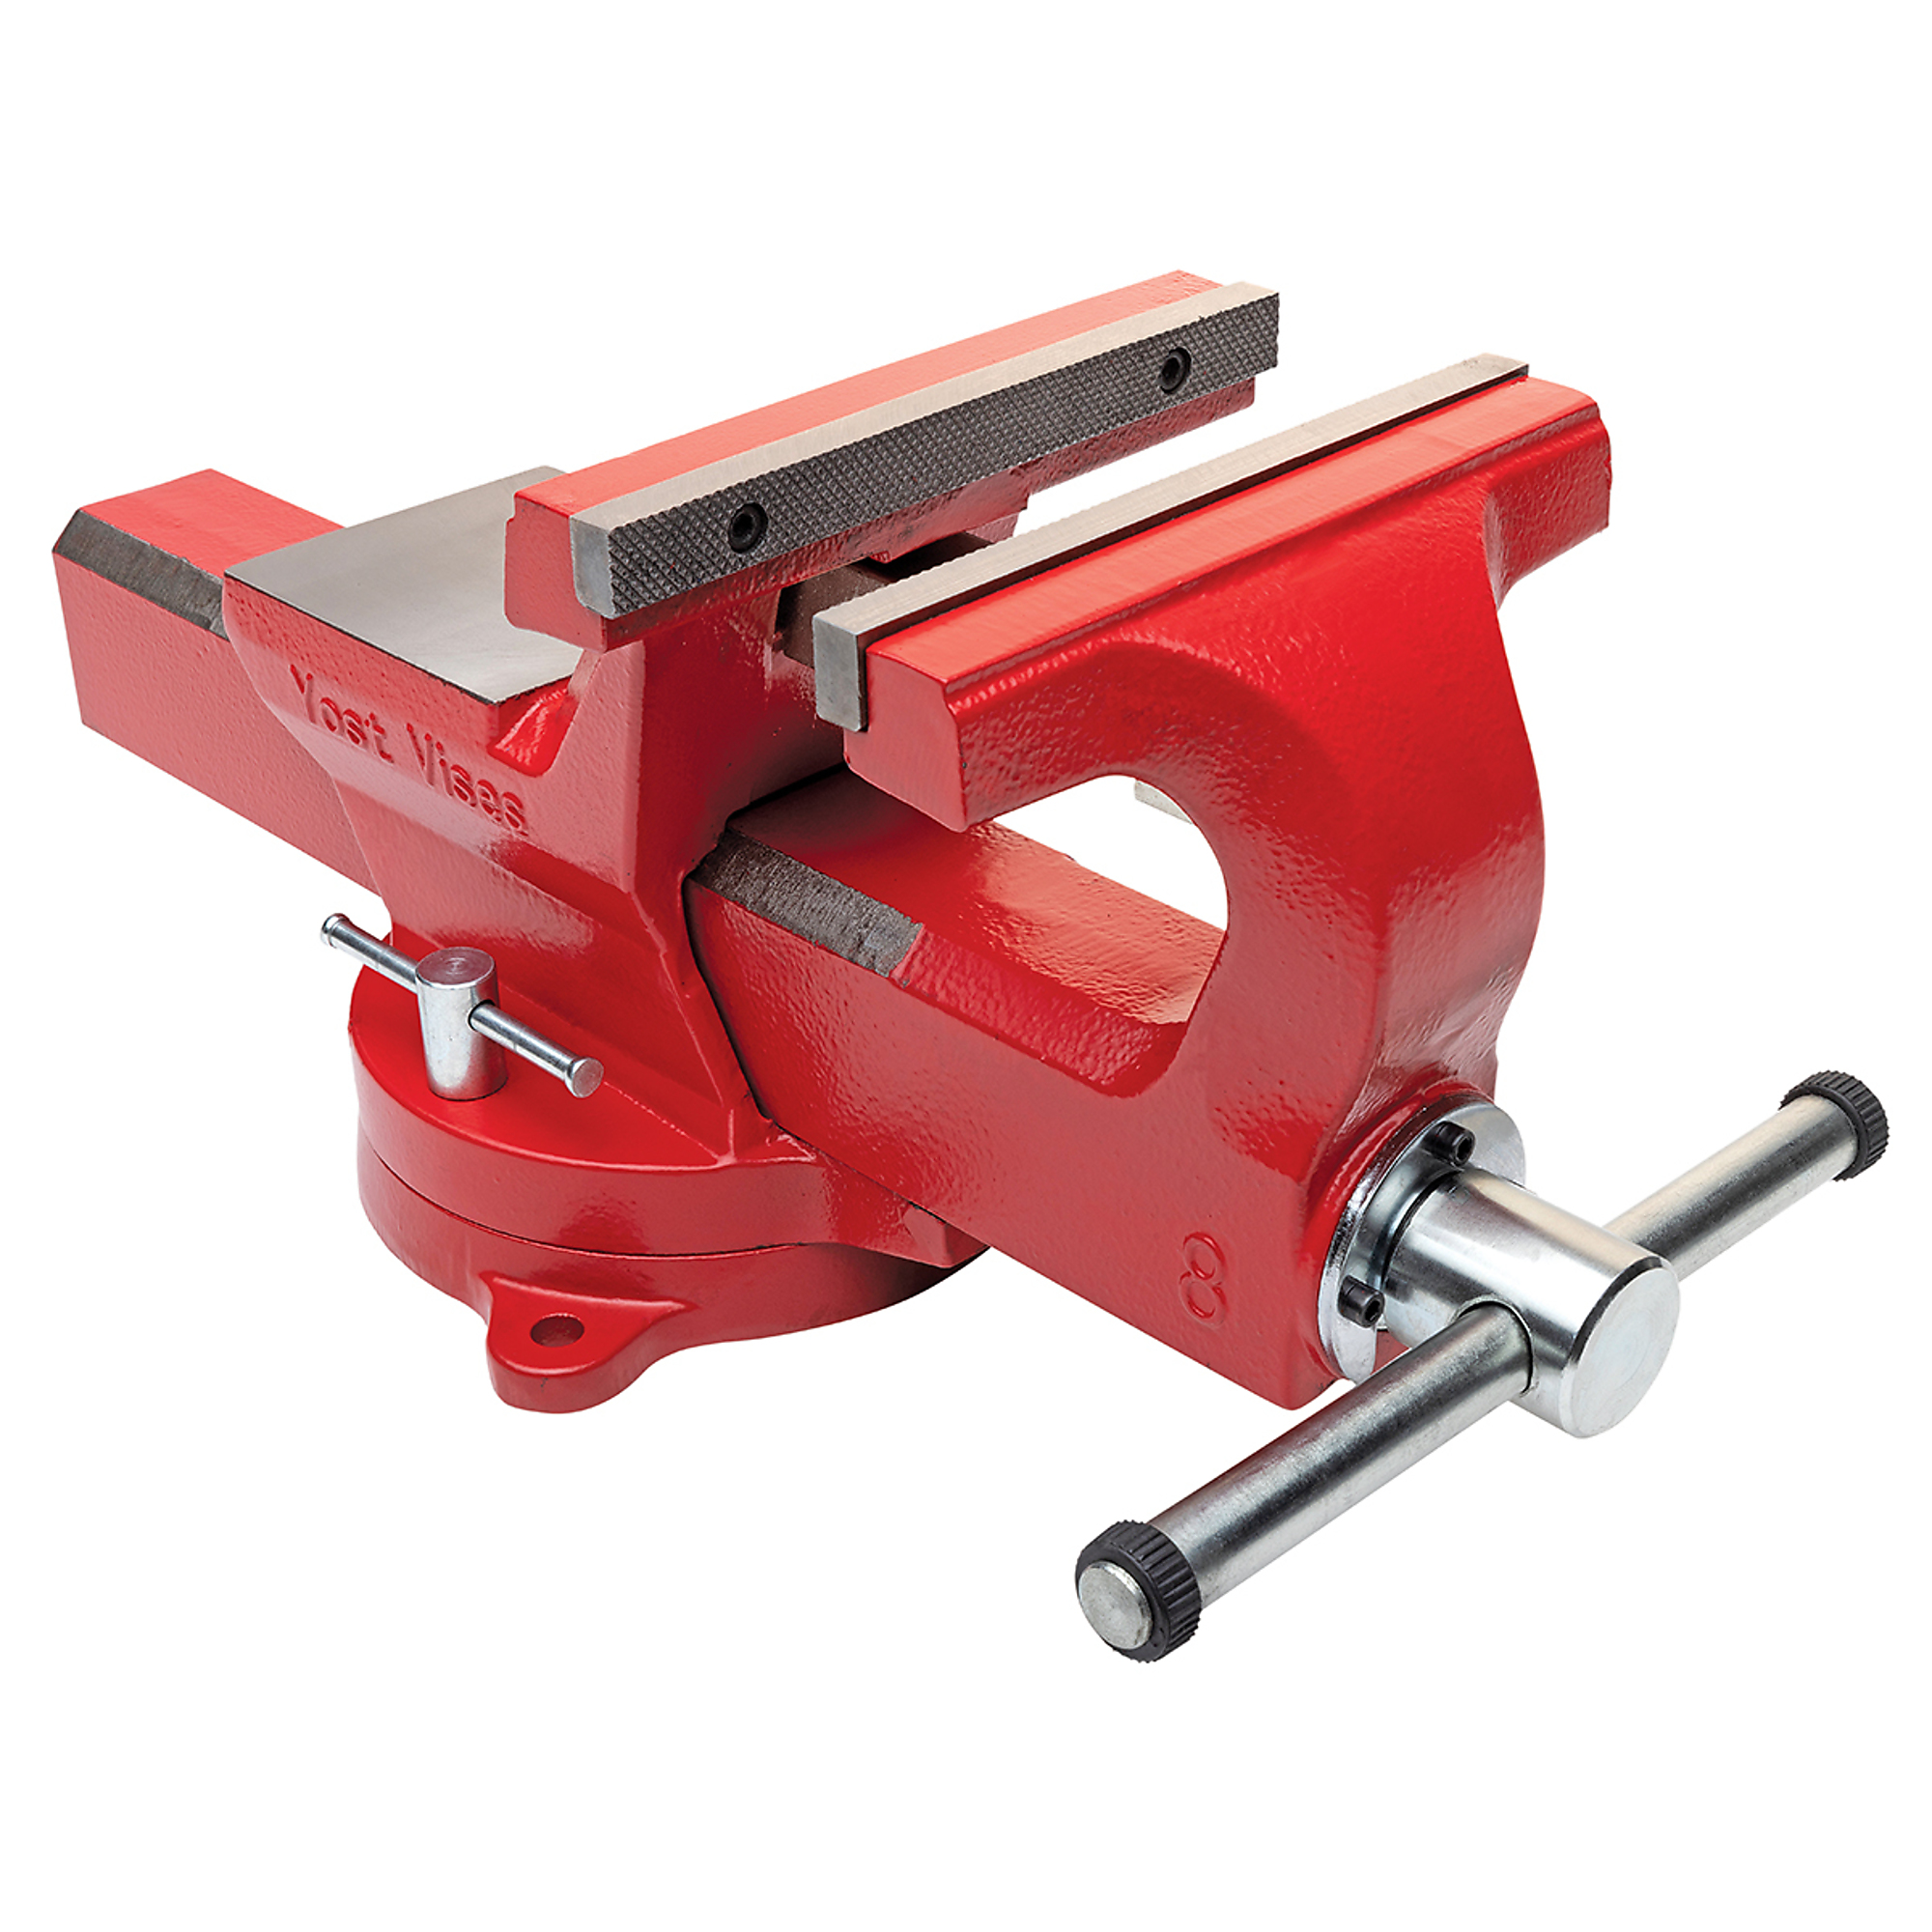 Yost Vises, 8Inch Bench Vise, Jaw Width 8 in, Jaw Capacity 0 in, Material Ductile Iron, Model ADI-8